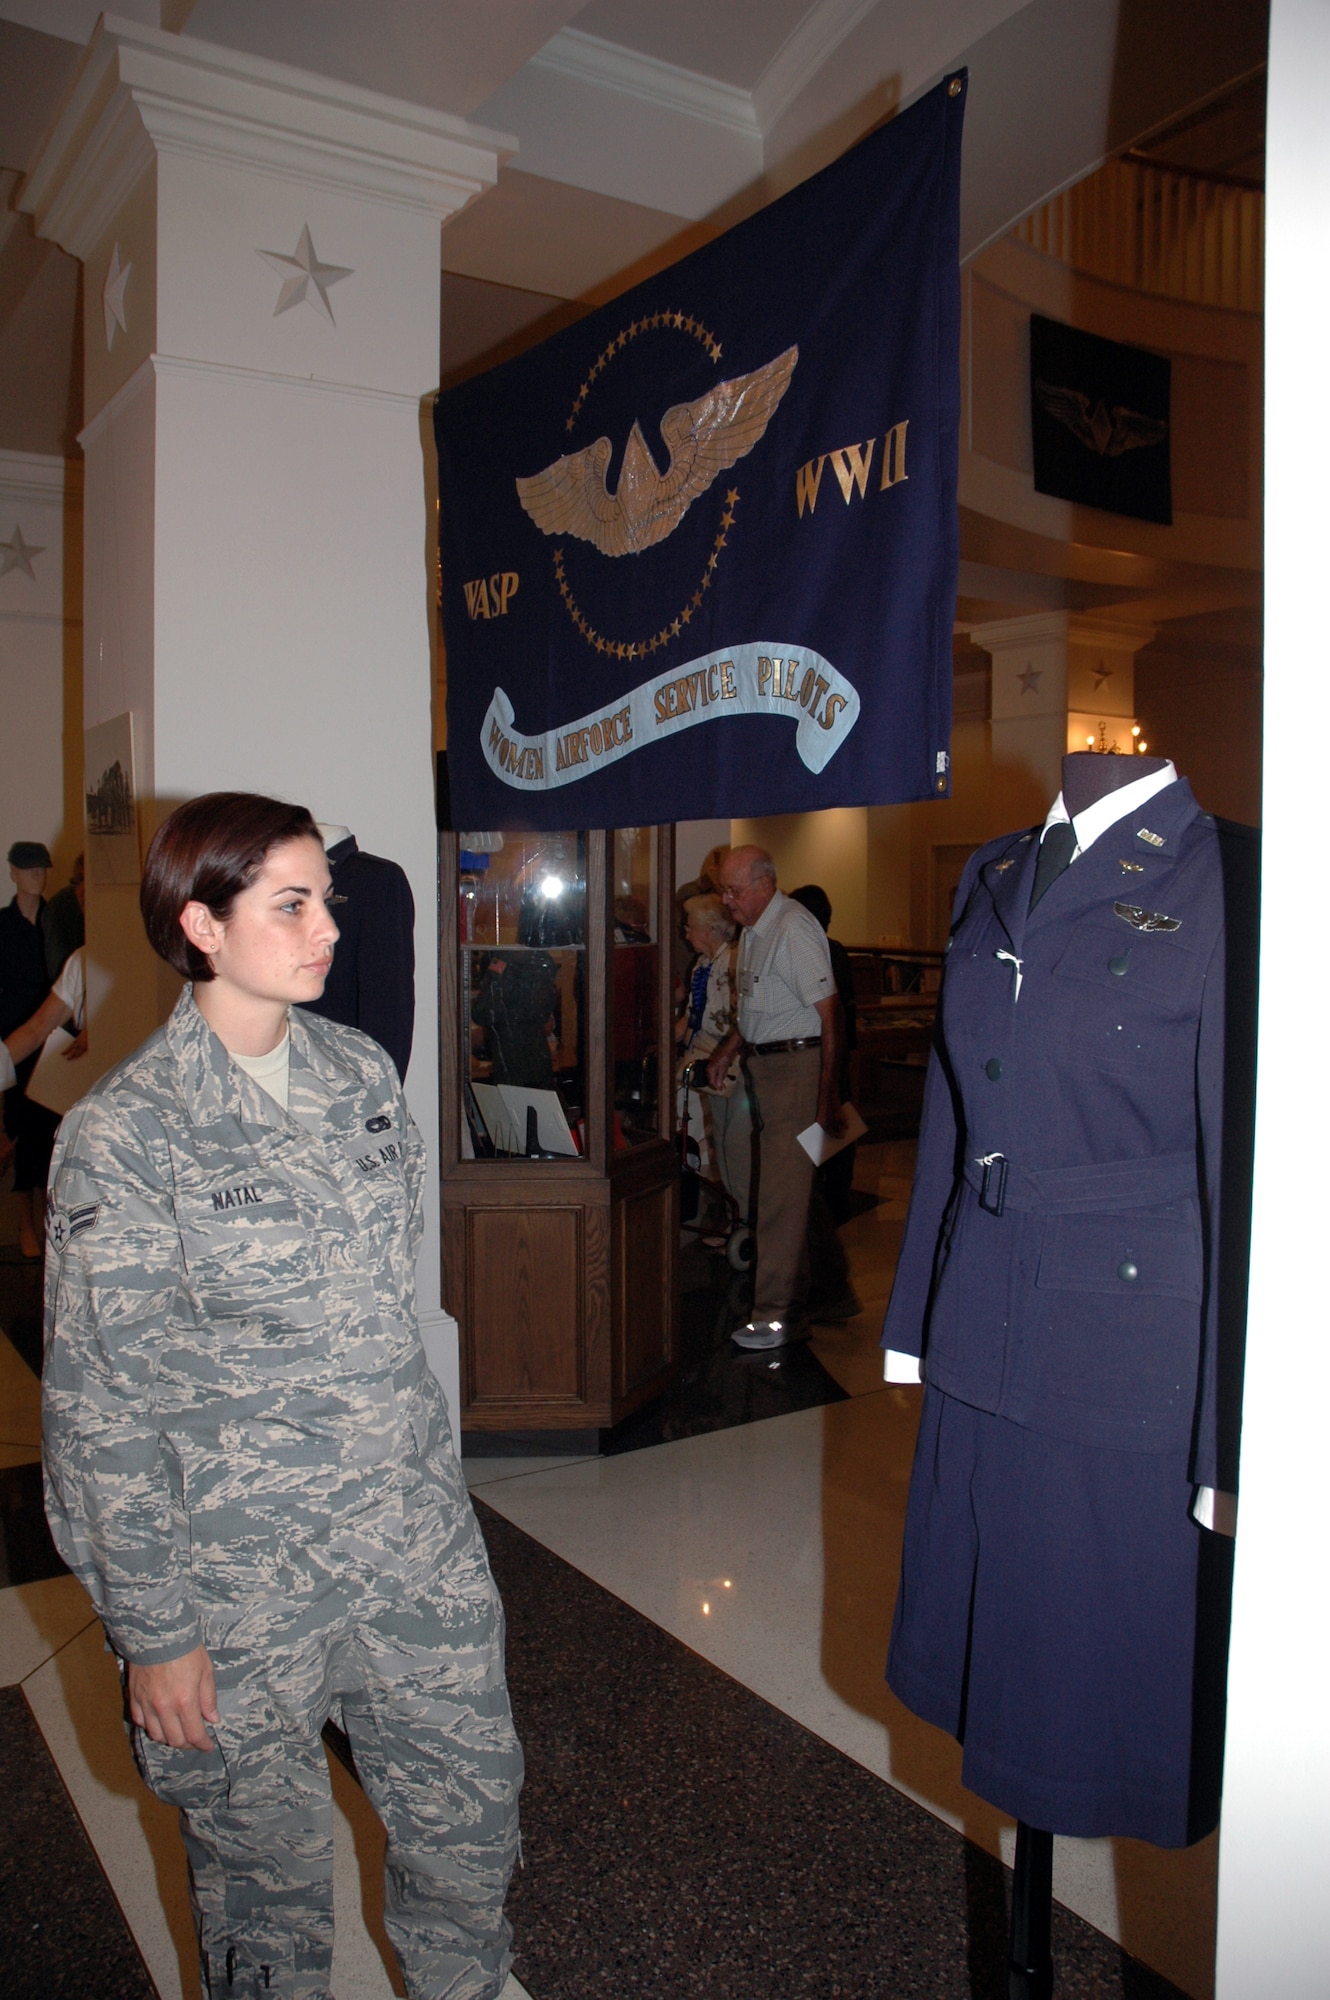 Air Force Reservist Airman 1st Class Veronica Natal, an air transporatation specialist with the 25th Aerial Port Squadron, Maxwell AFB, Ala.'s 908th Airlift Wing, admires a WASP uniform on display at the new WASP archive museum at The Texas Women's University library. (U.S. Air Force Photo by Staff Sgt. Jay Ponder